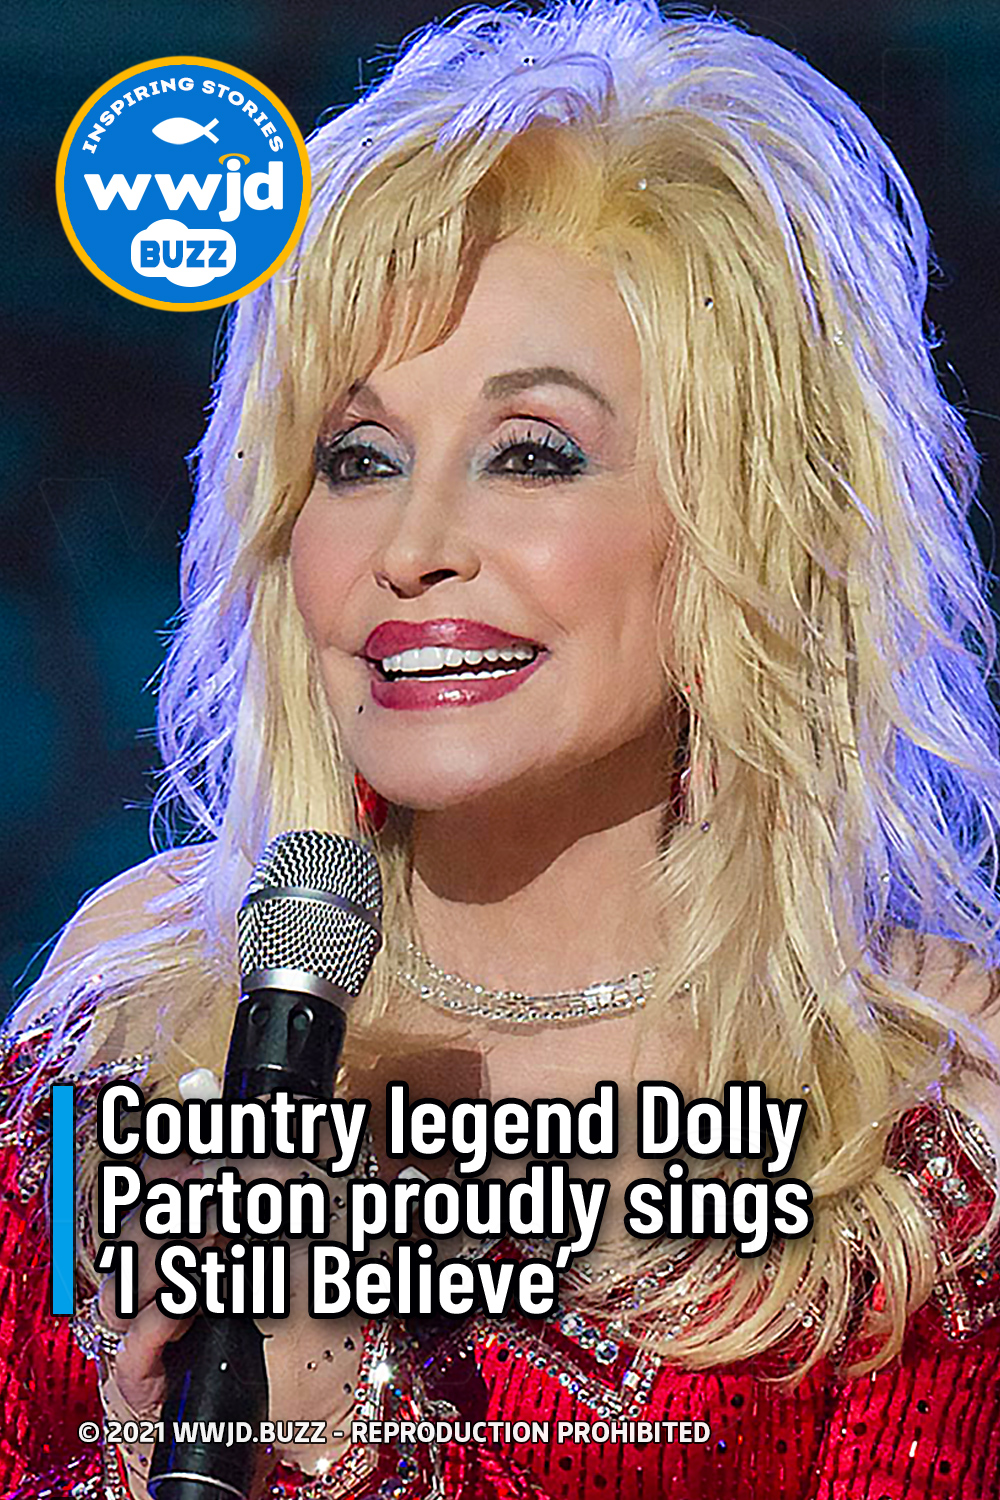 Country legend Dolly Parton proudly sings ‘I Still Believe’